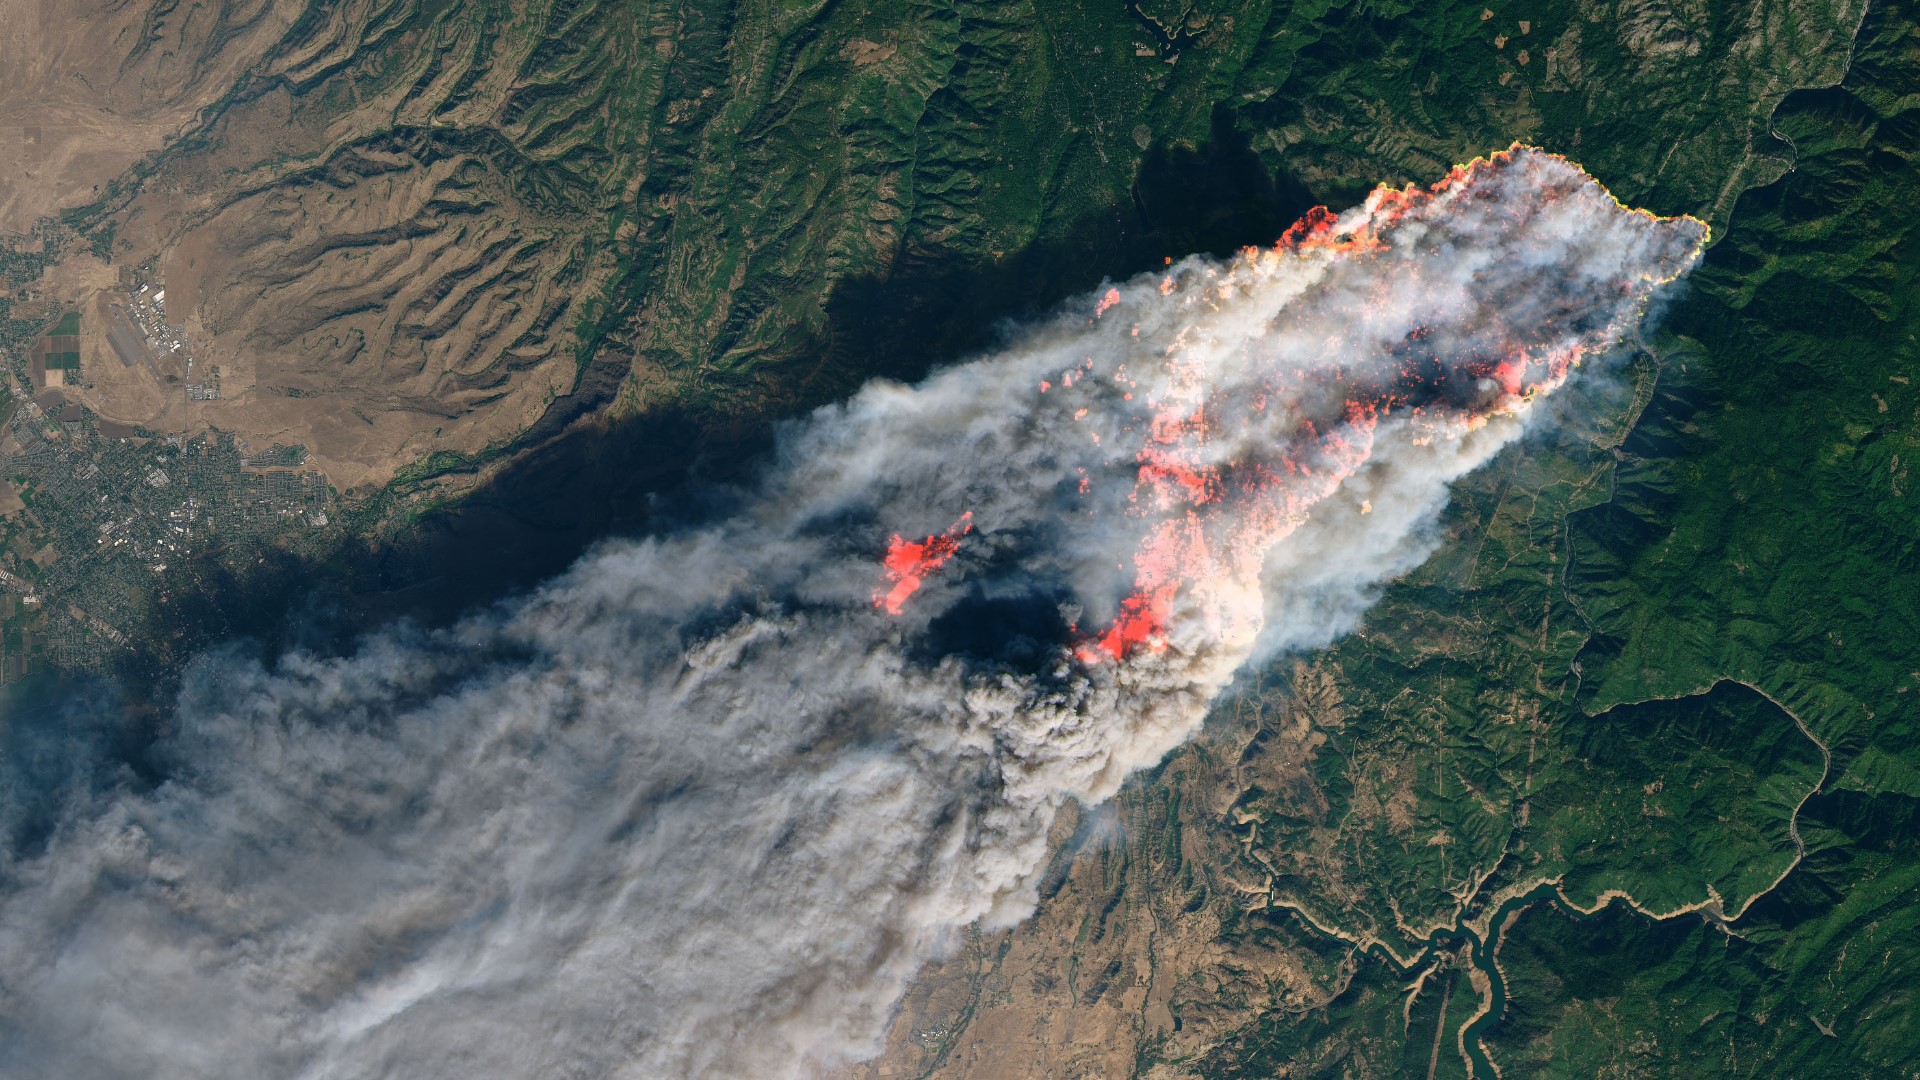 Researchers are working toward providing not only current fire risk, but long-term risk which would provide guidance months, and even seasons, ahead.